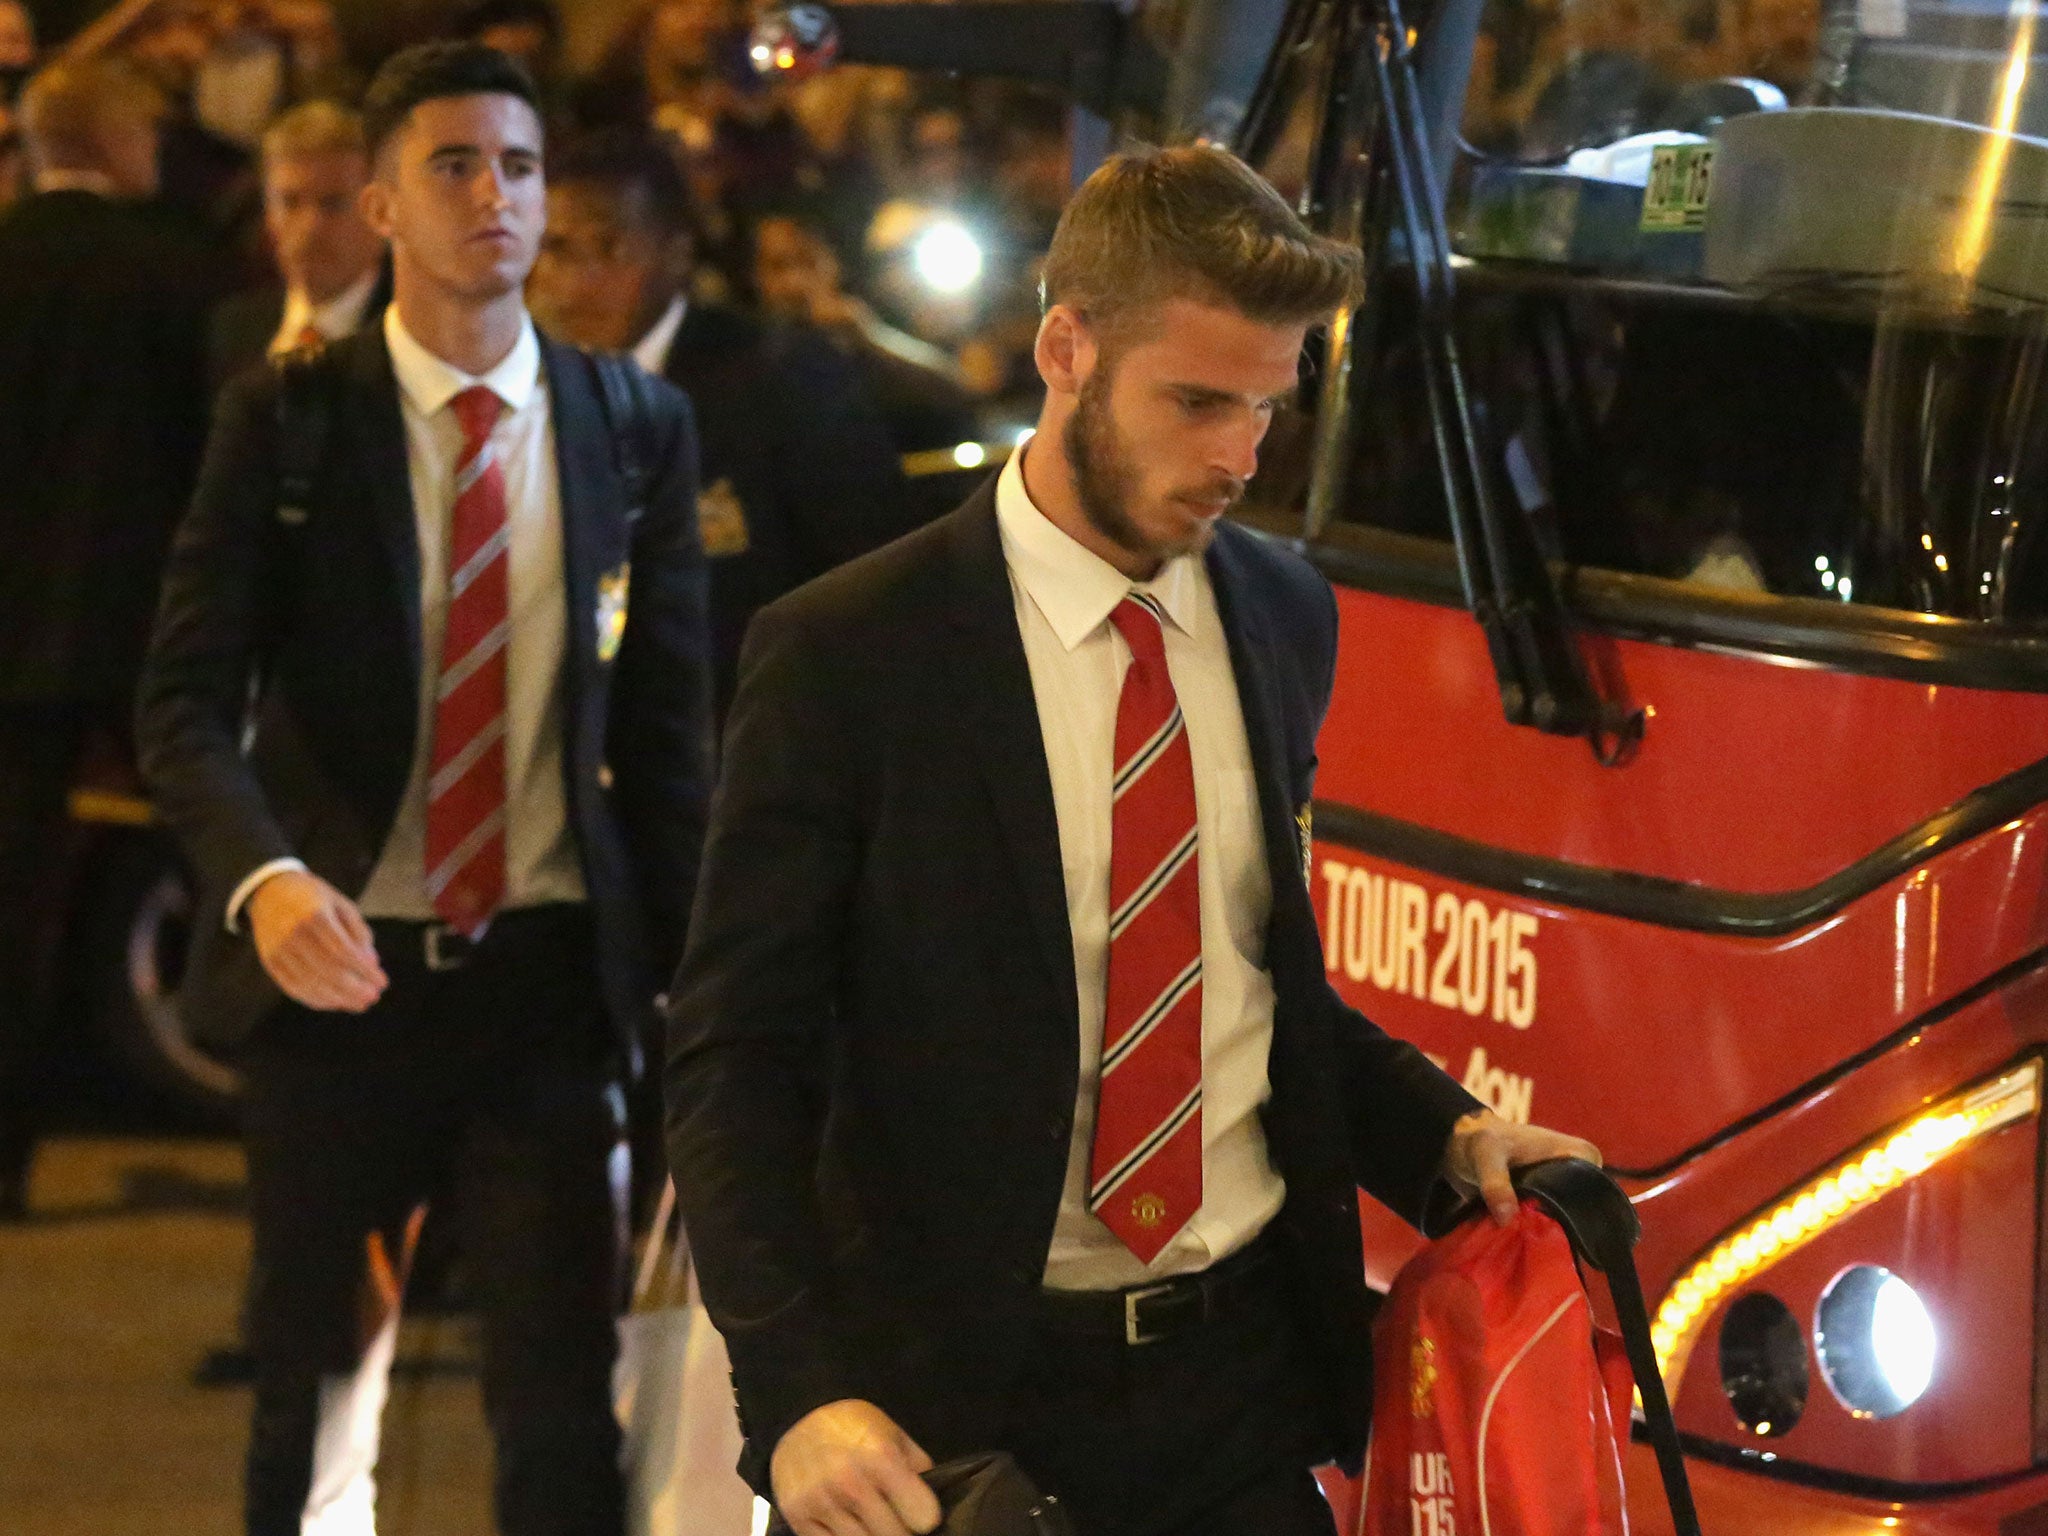 David de Gea arrives in Chicago as part of Manchester United's pre-season tour of the USA